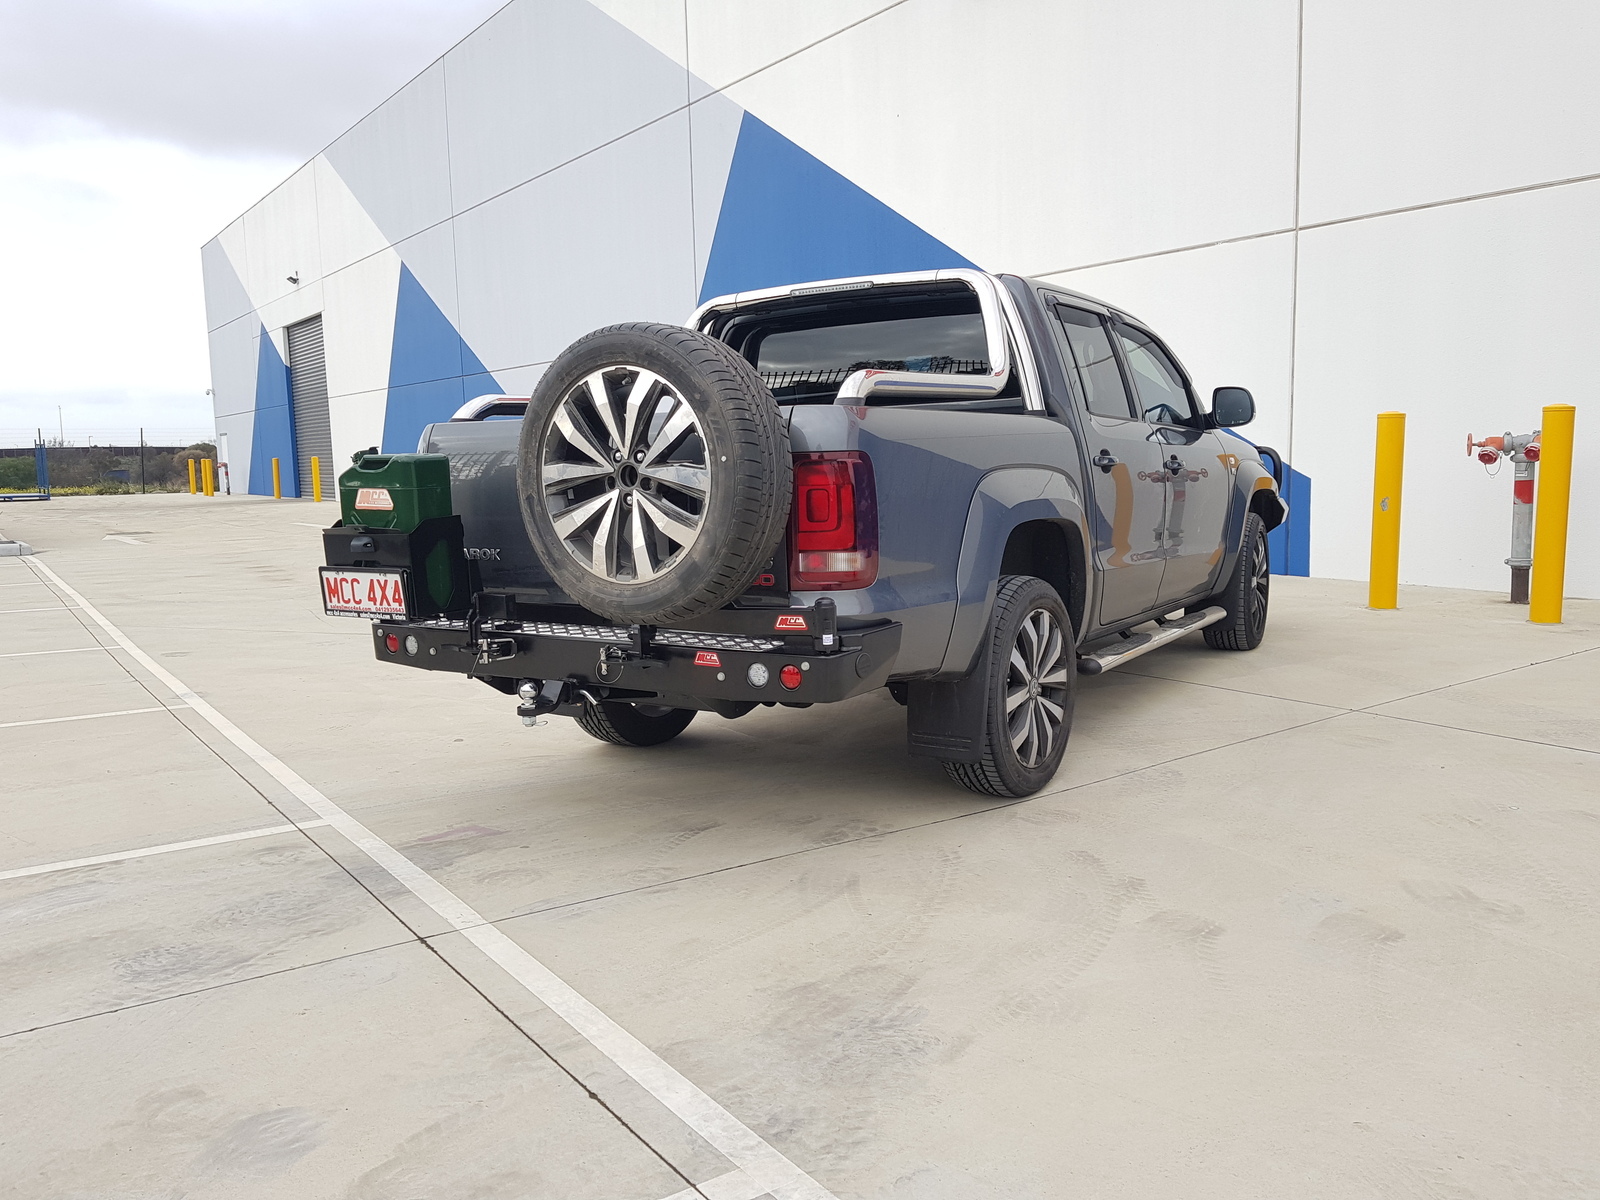 MCC SINGLE WHEEL CARRIER AND DUAL JERRY CAN TO SUIT VOLKSWAGEN AMAROK 2011 ON